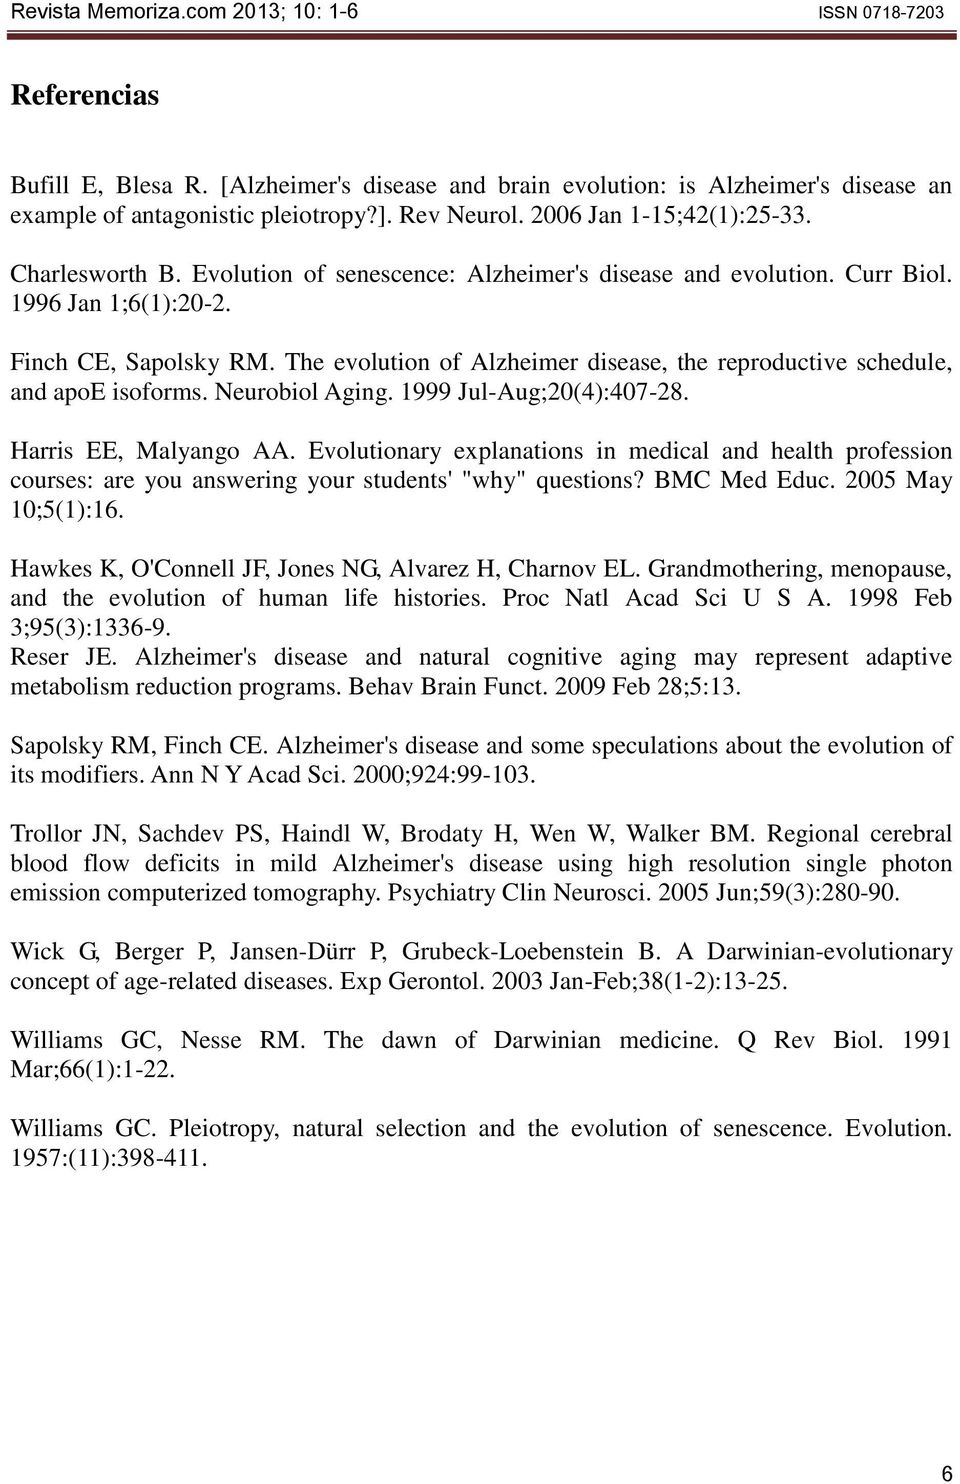 Neurobiol Aging. 1999 Jul-Aug;20(4):407-28. Harris EE, Malyango AA. Evolutionary explanations in medical and health profession courses: are you answering your students' "why" questions? BMC Med Educ.